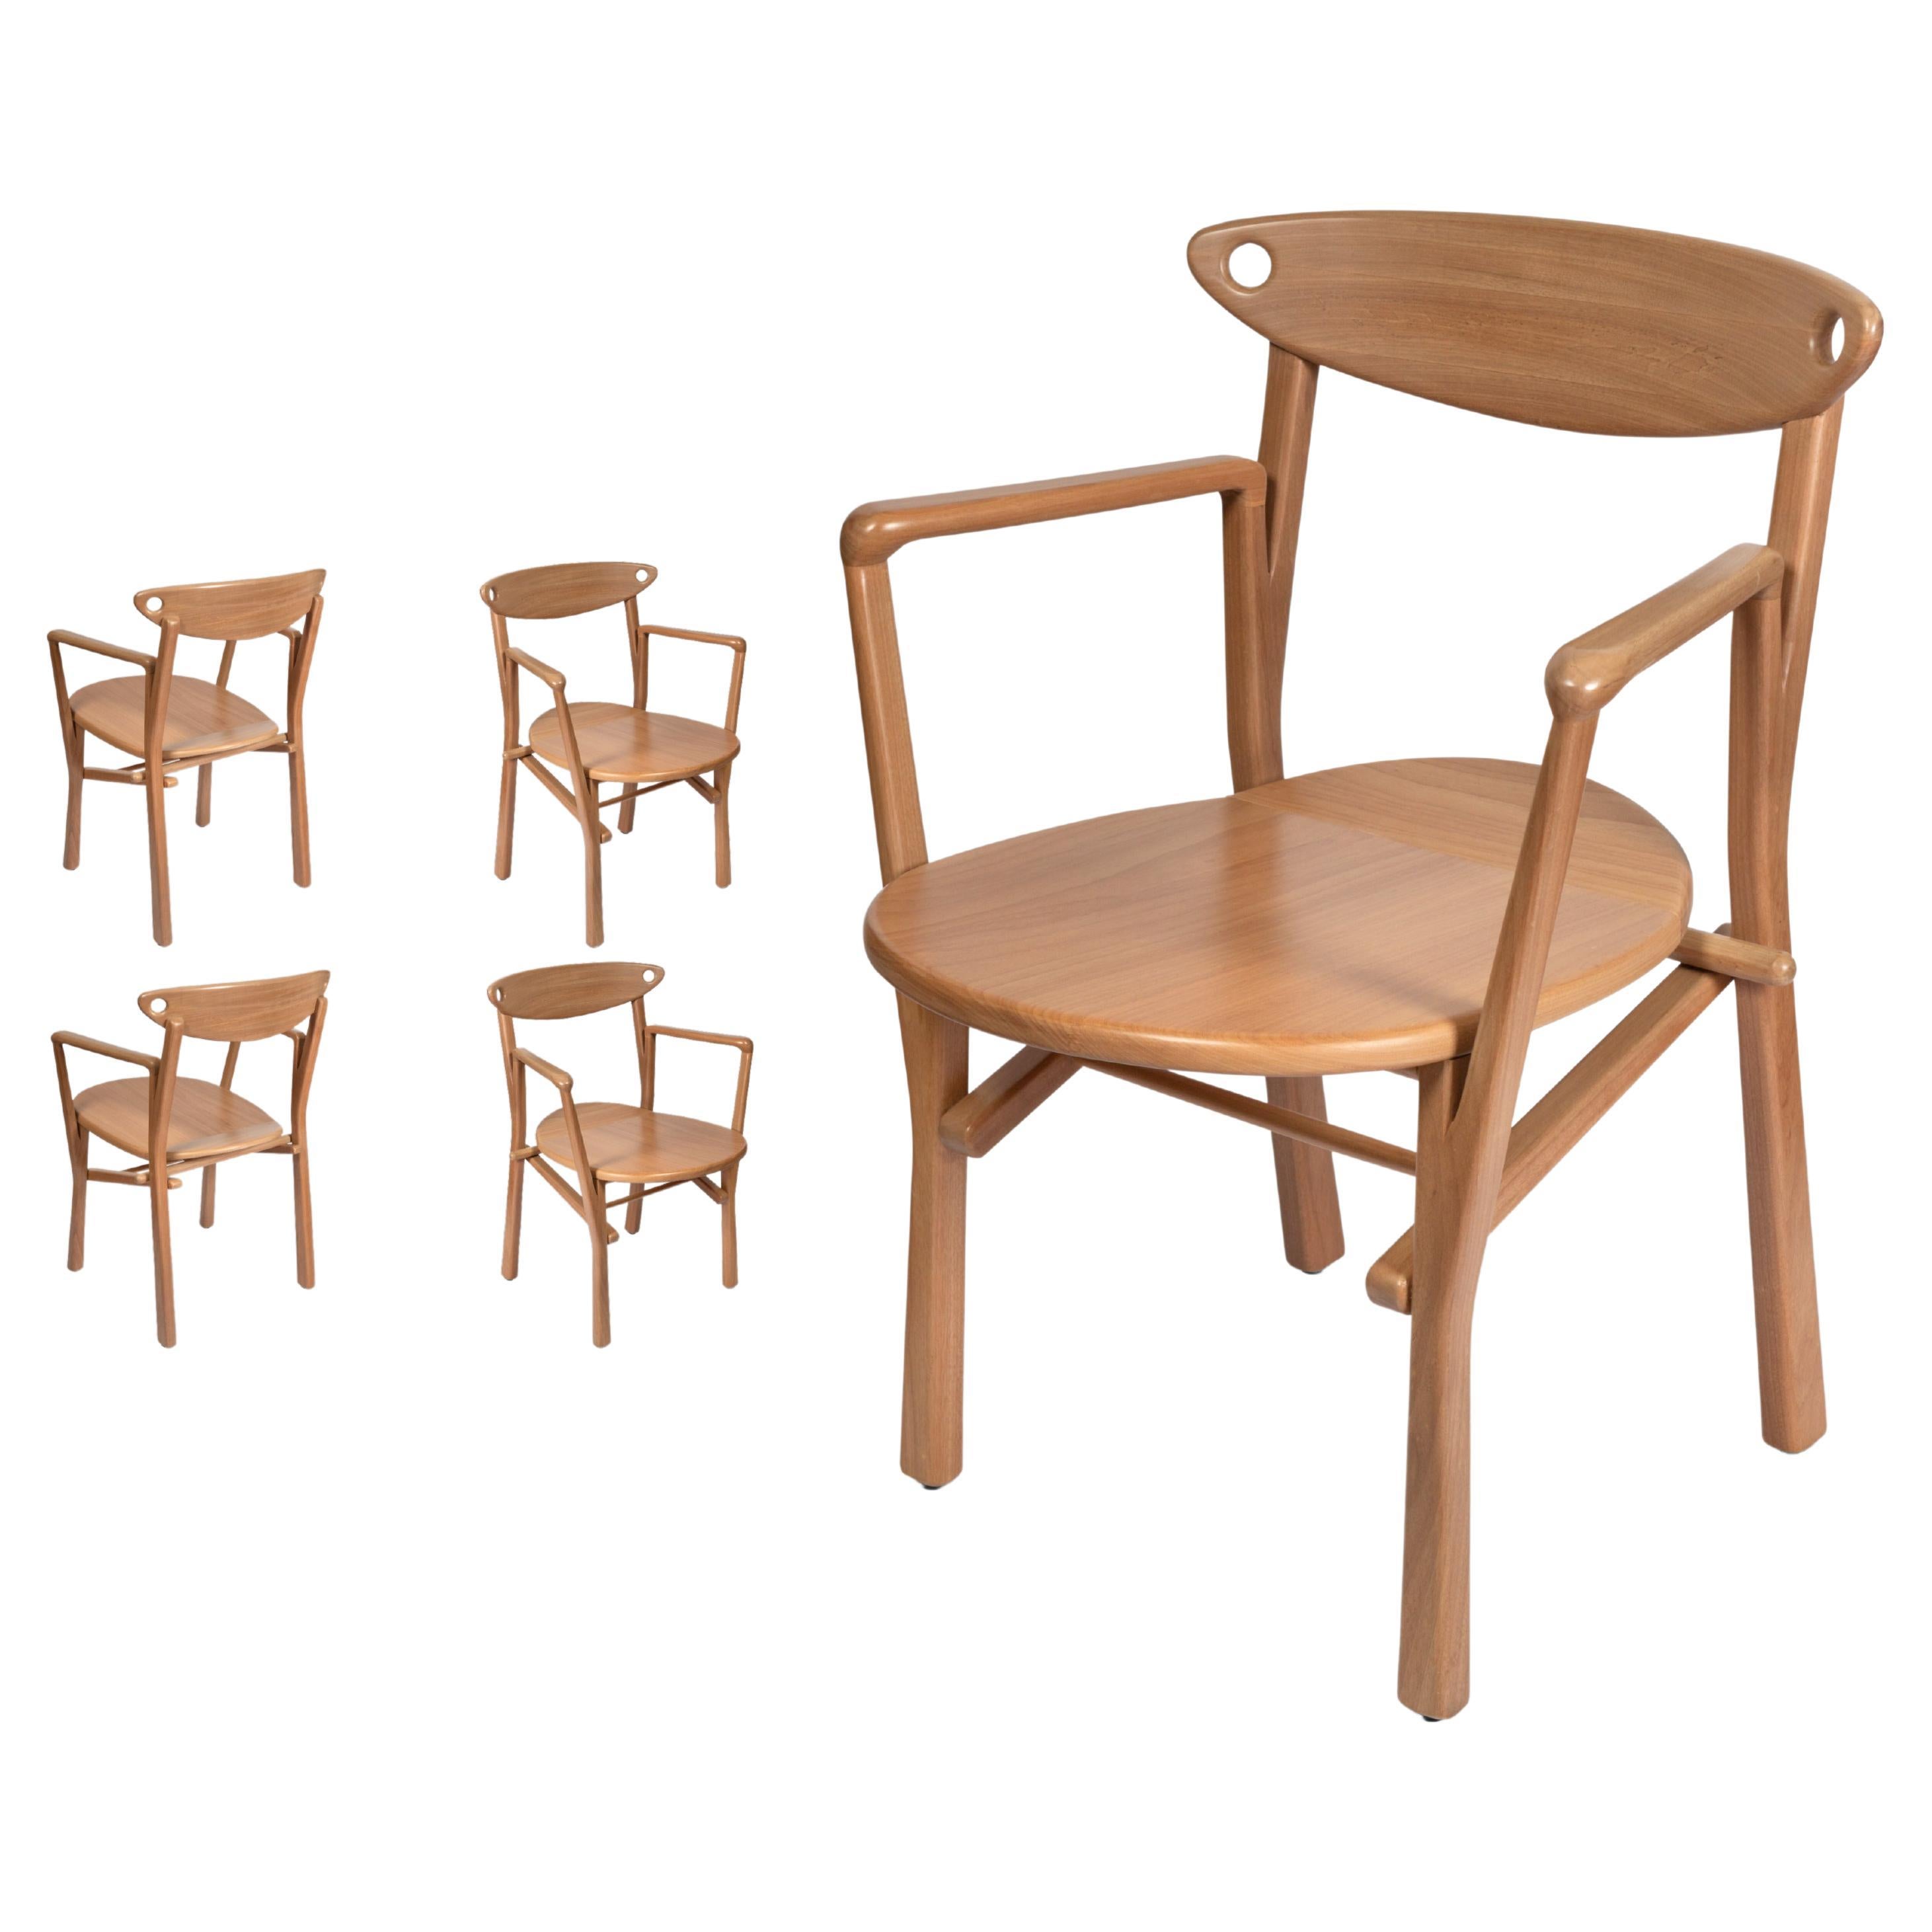 Set of 4 Armchair Chairs Laje in Natural Wood For Sale